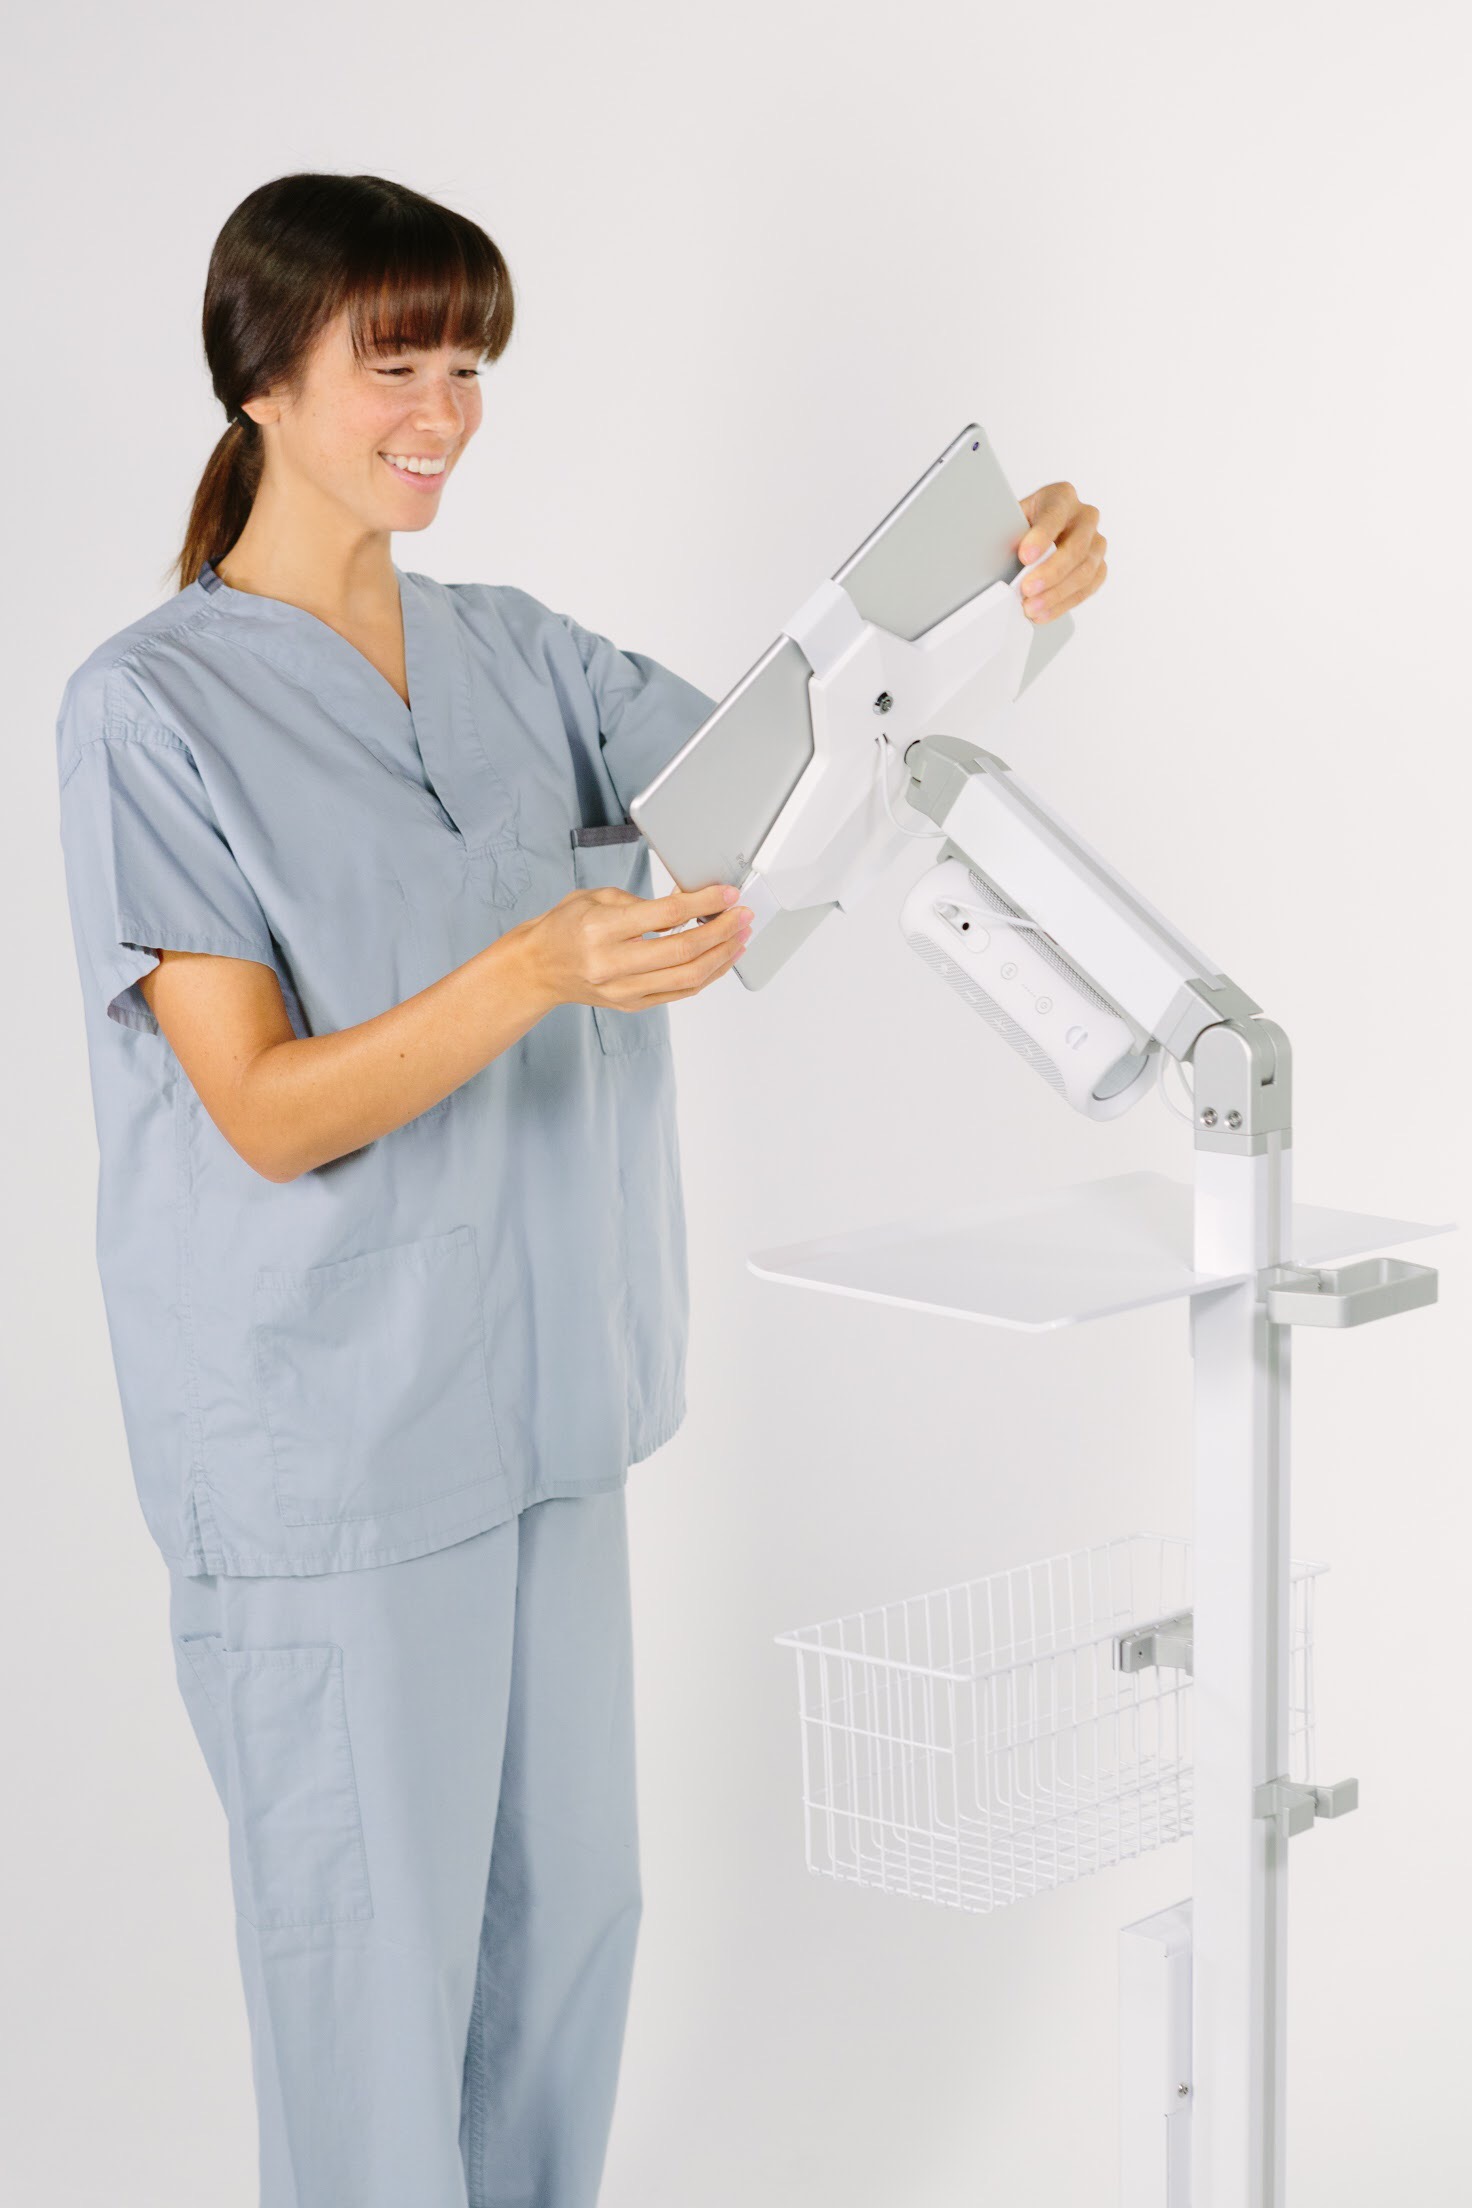 Best telehealth carts for doctors offices